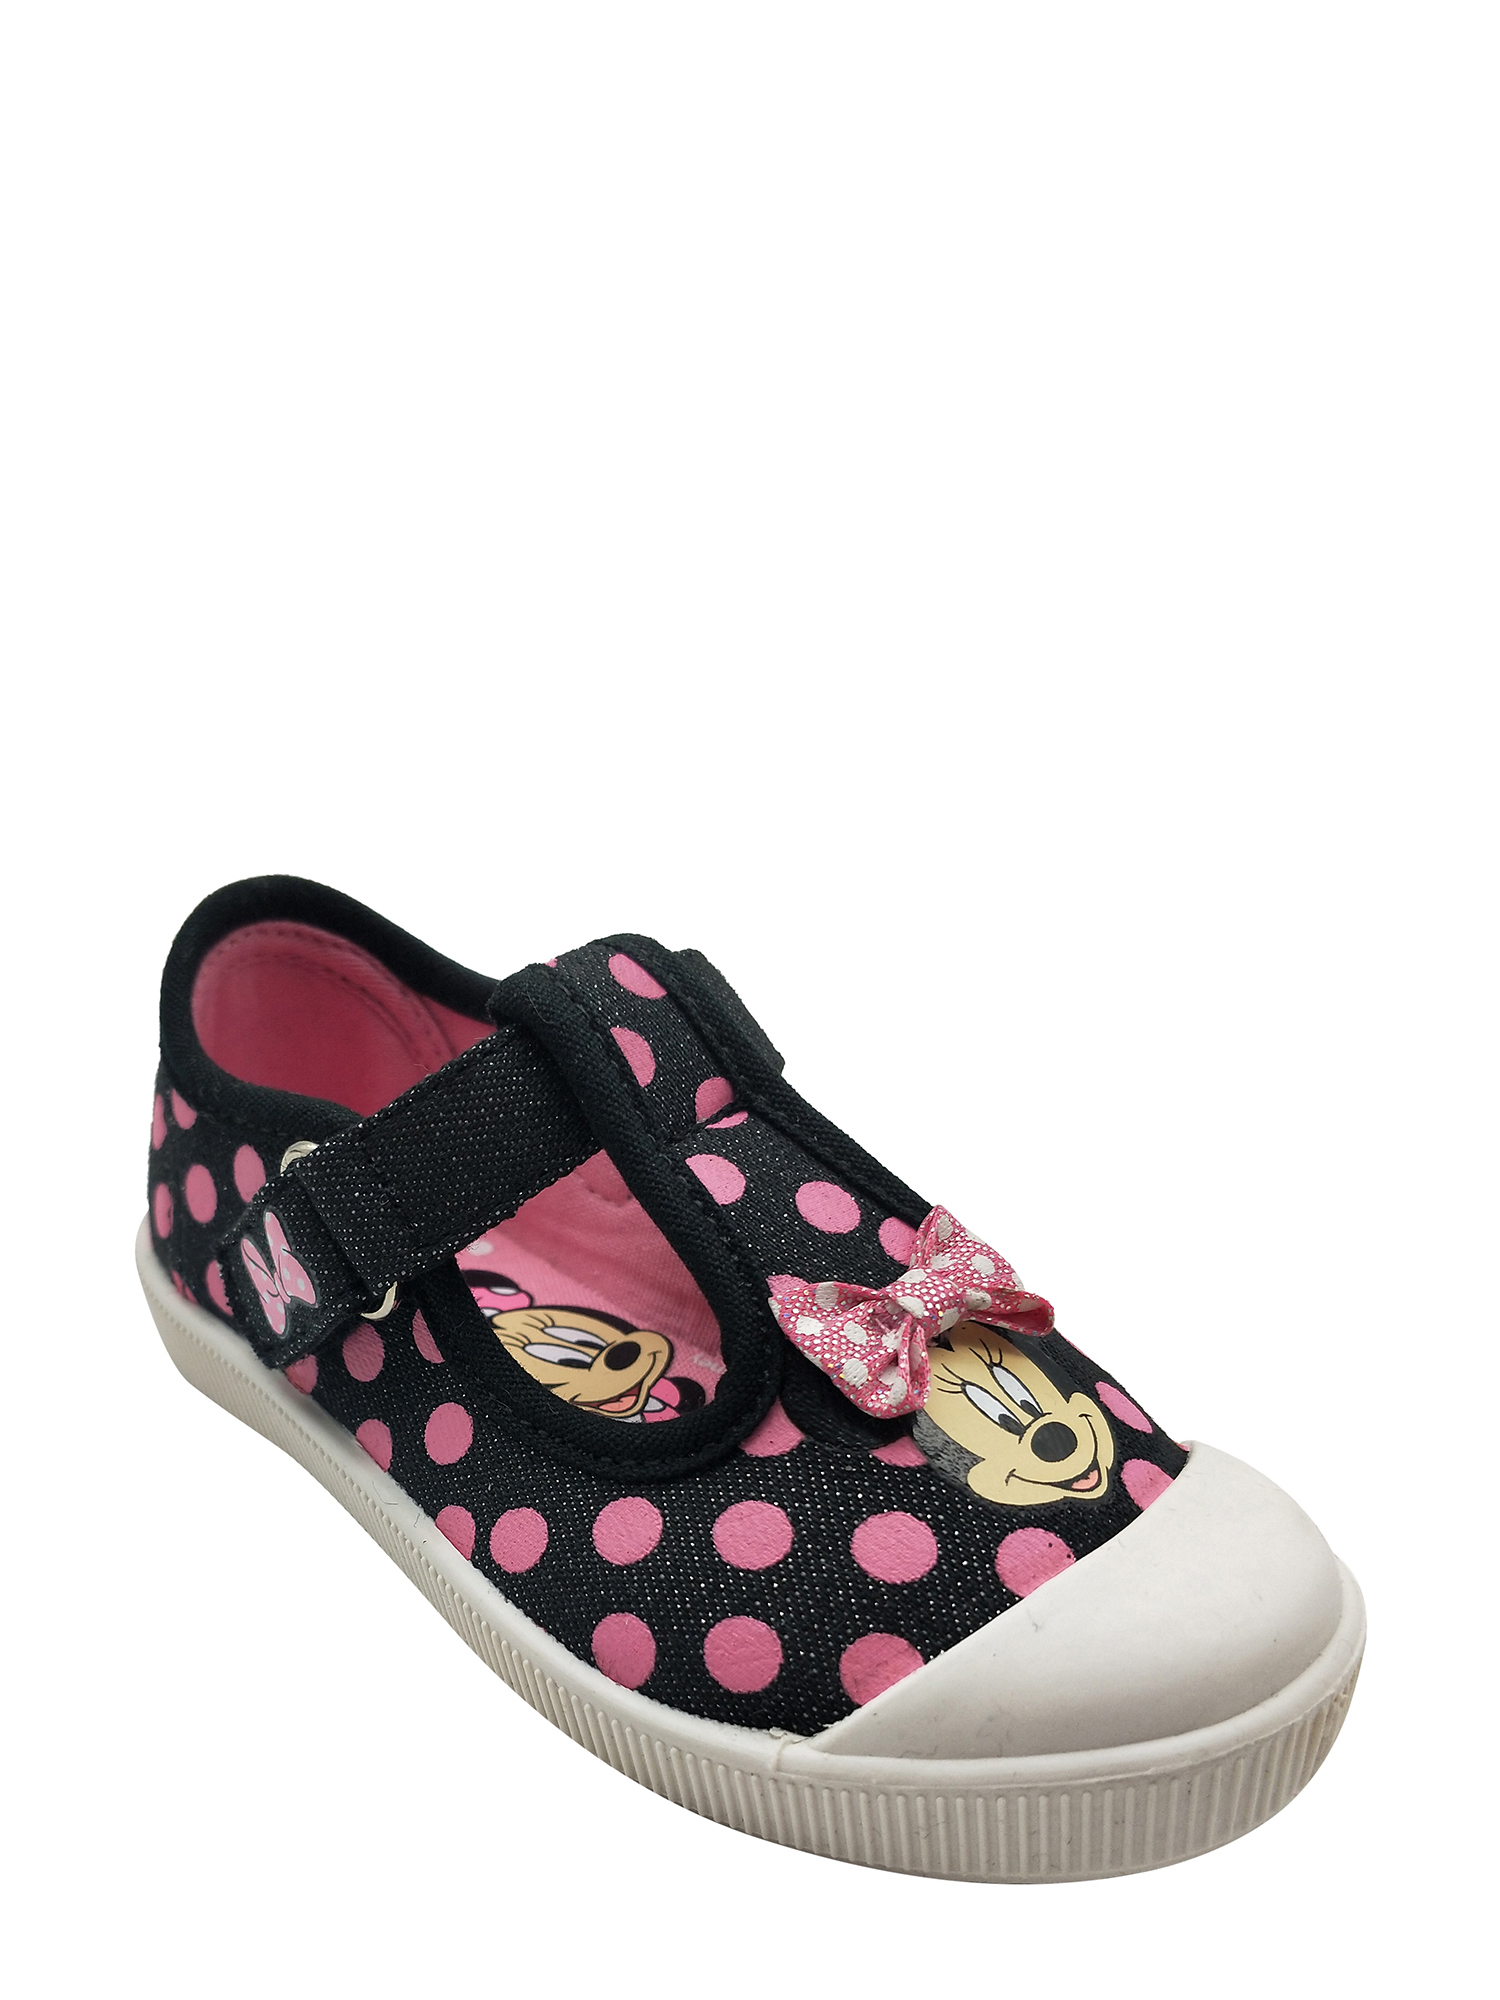 Minnie Mouse Polka Dot T-Strap Casual Shoe (Toddler Girls) - image 1 of 6